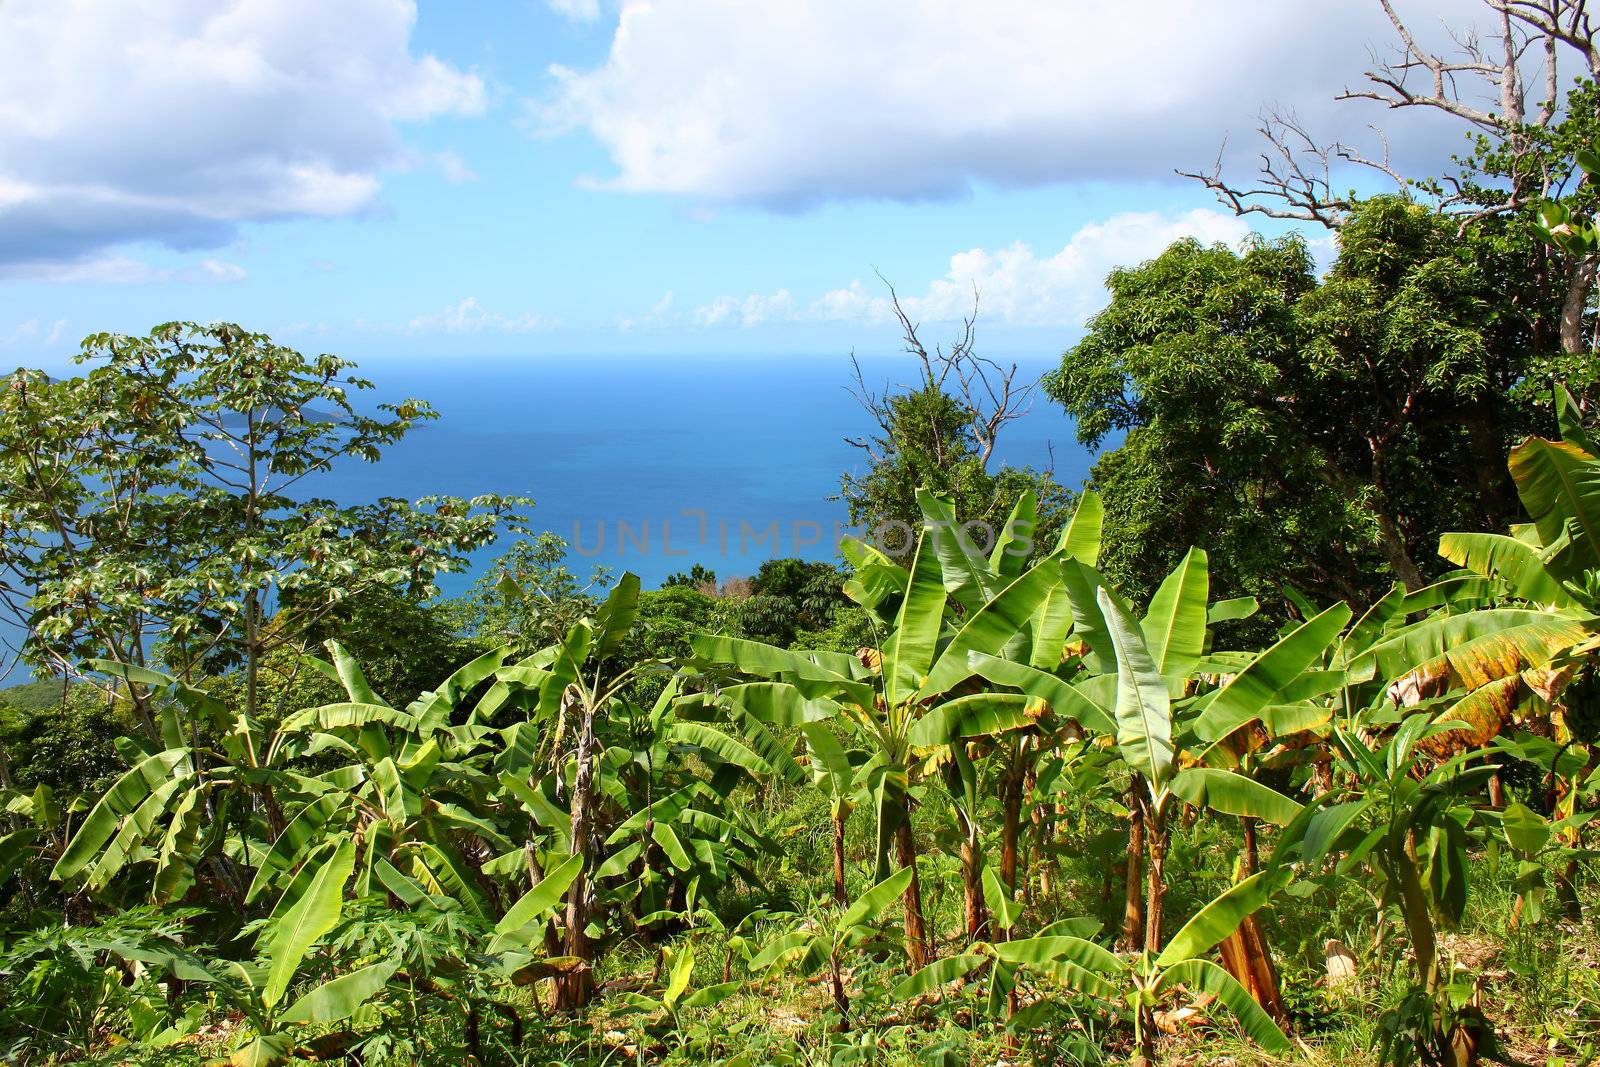 Tropical vegetation and forest scenery on the Caribbean island of Tortola.